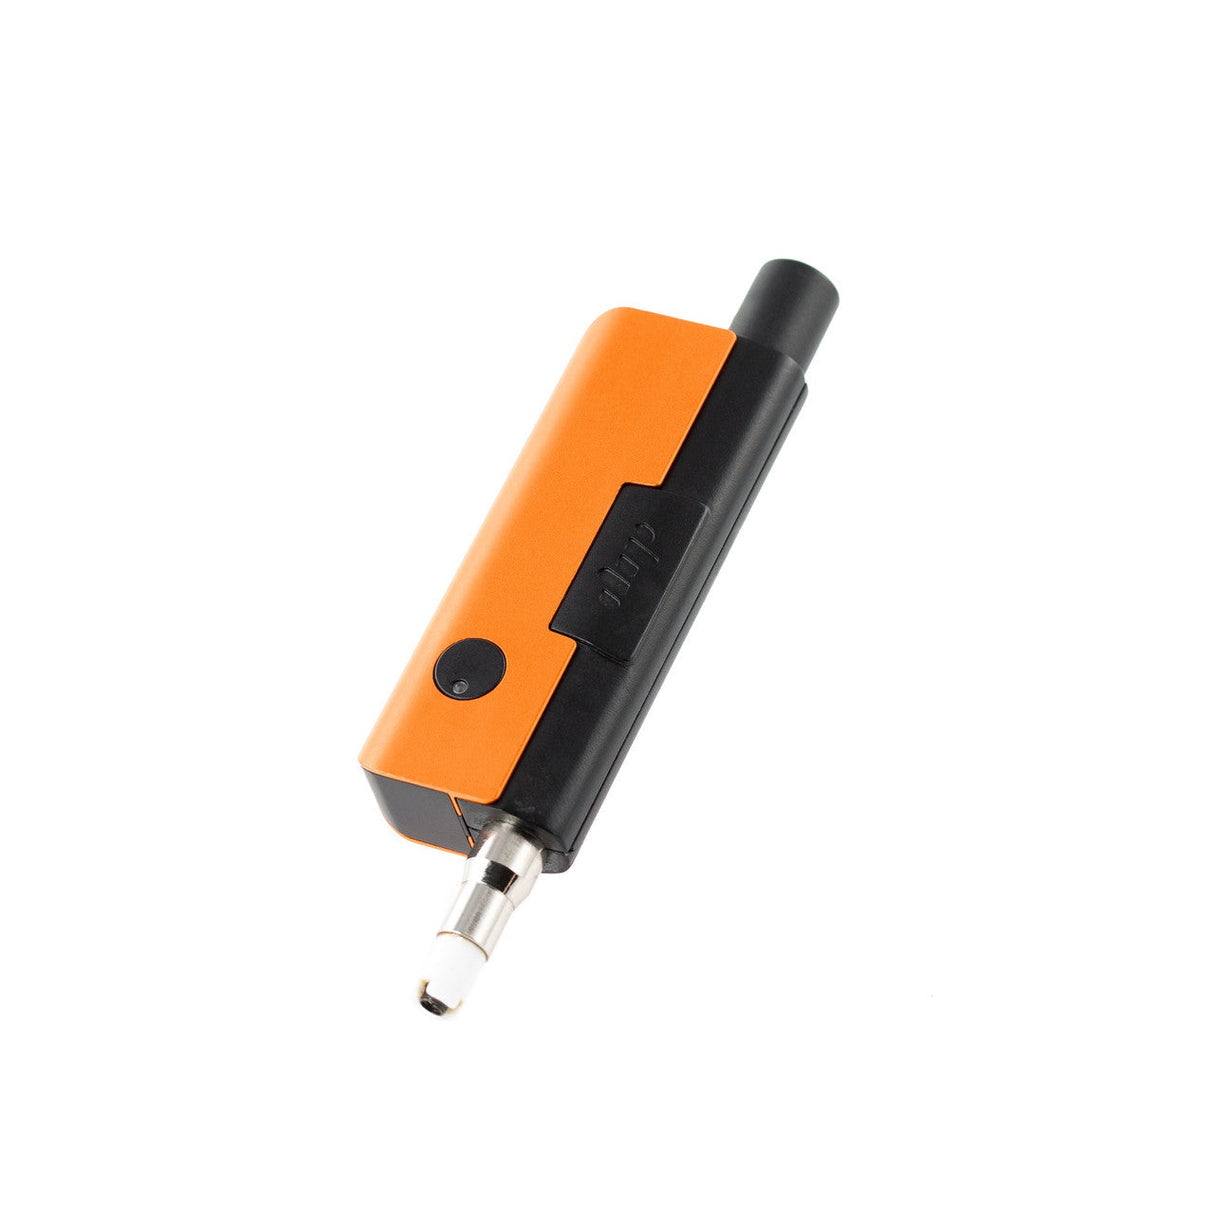 Dip Devices Evri Starter Kit in Orange - Compact Battery-Powered Vaporizer for Concentrates, Front View